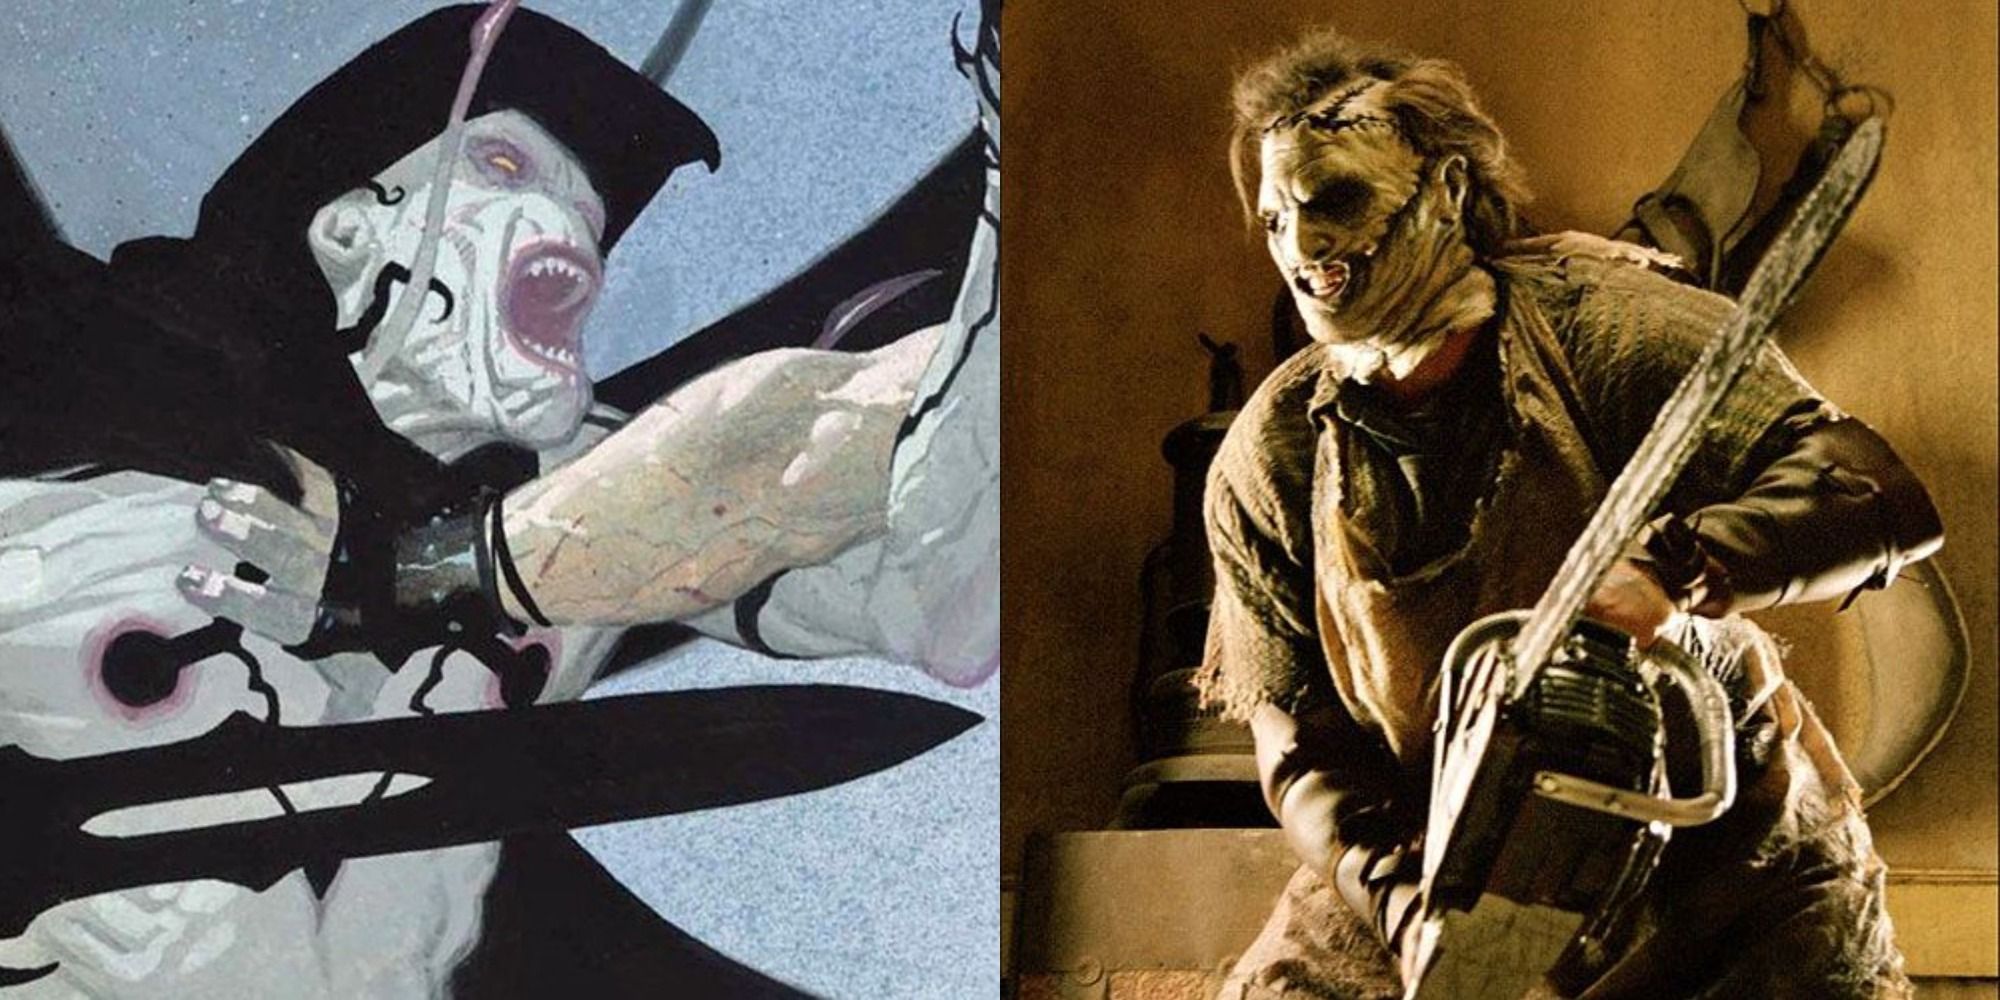 Split image showing Gorr the God Butcher and Leatherface.